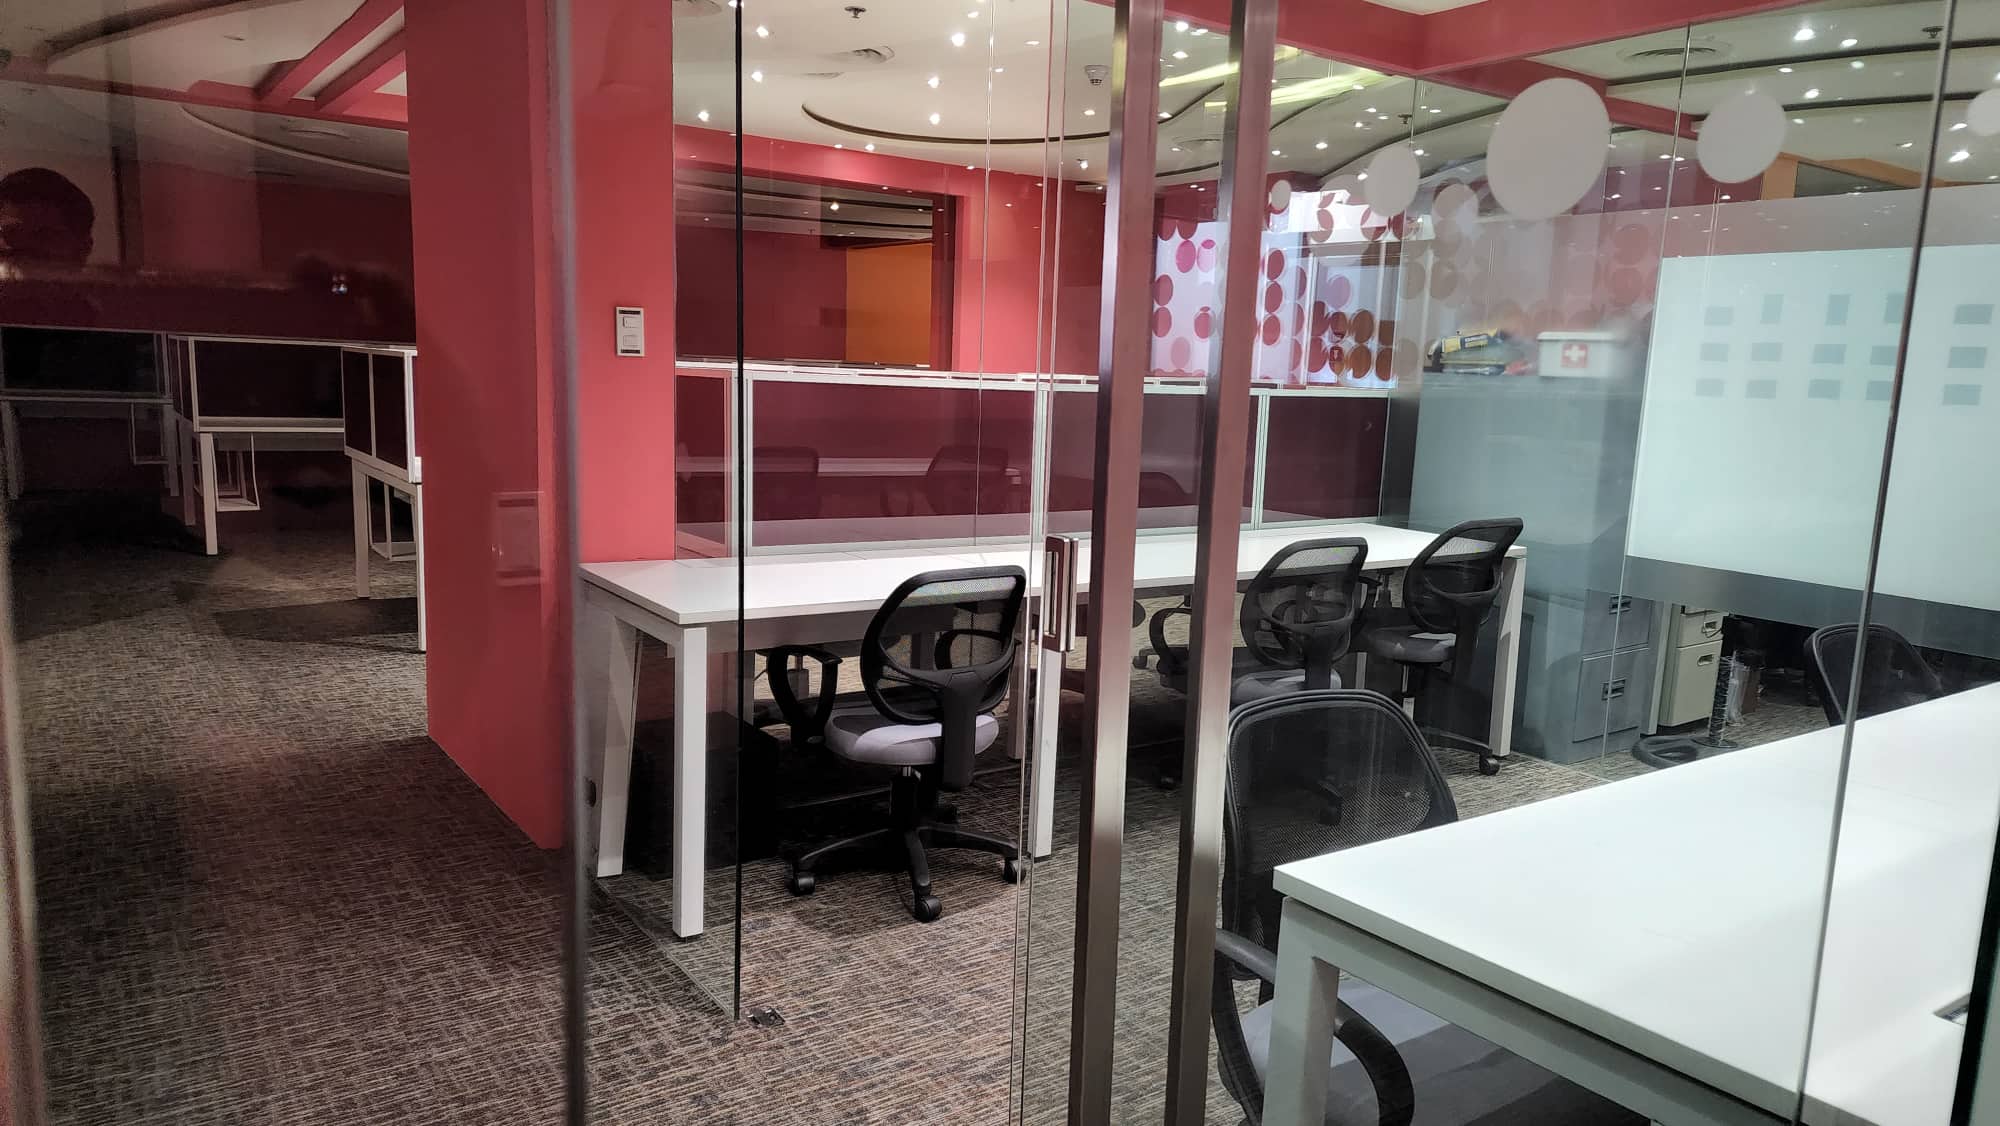 100 Seats Plug and Play Seat Lease Eastwood Quezon City